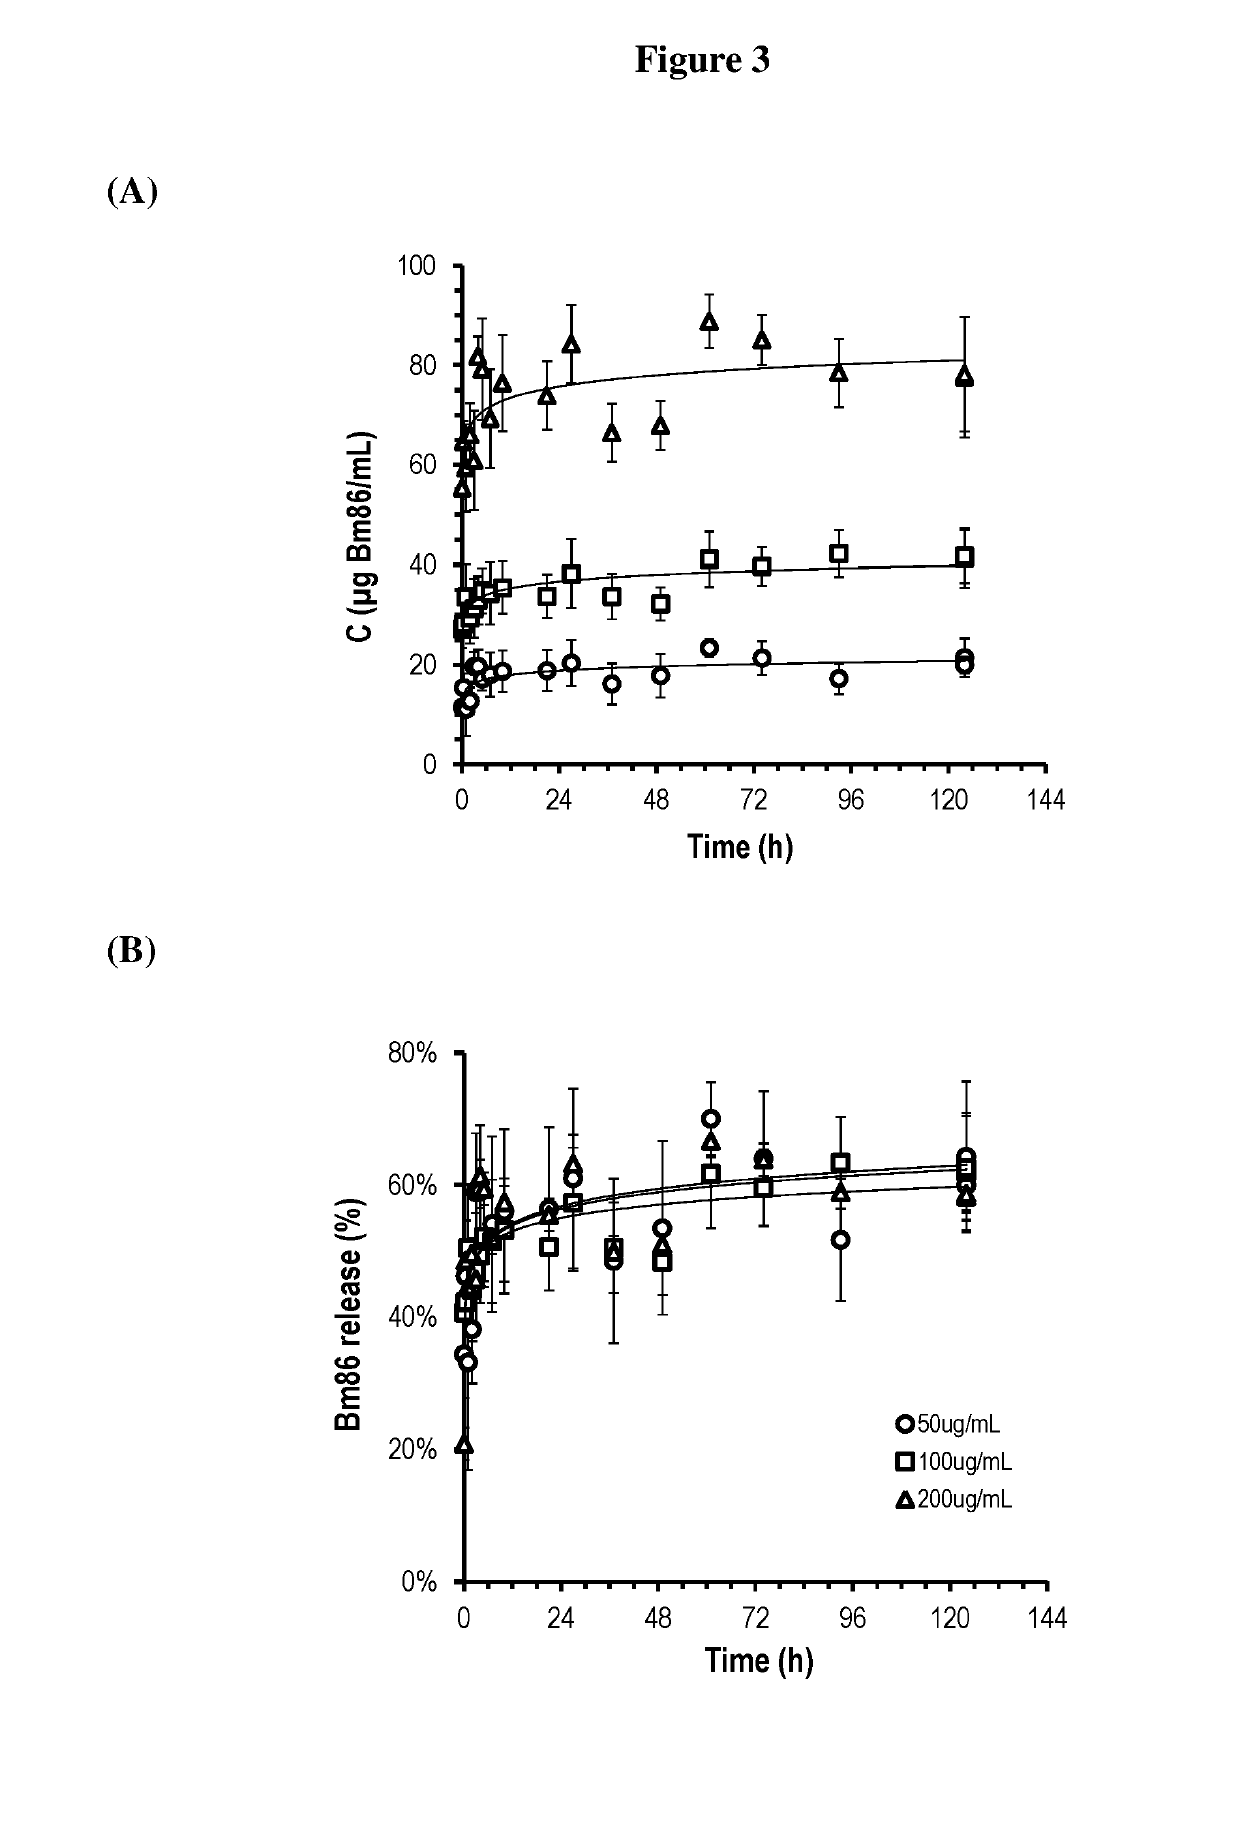 Injectable composition for delivery of a biologically active agent